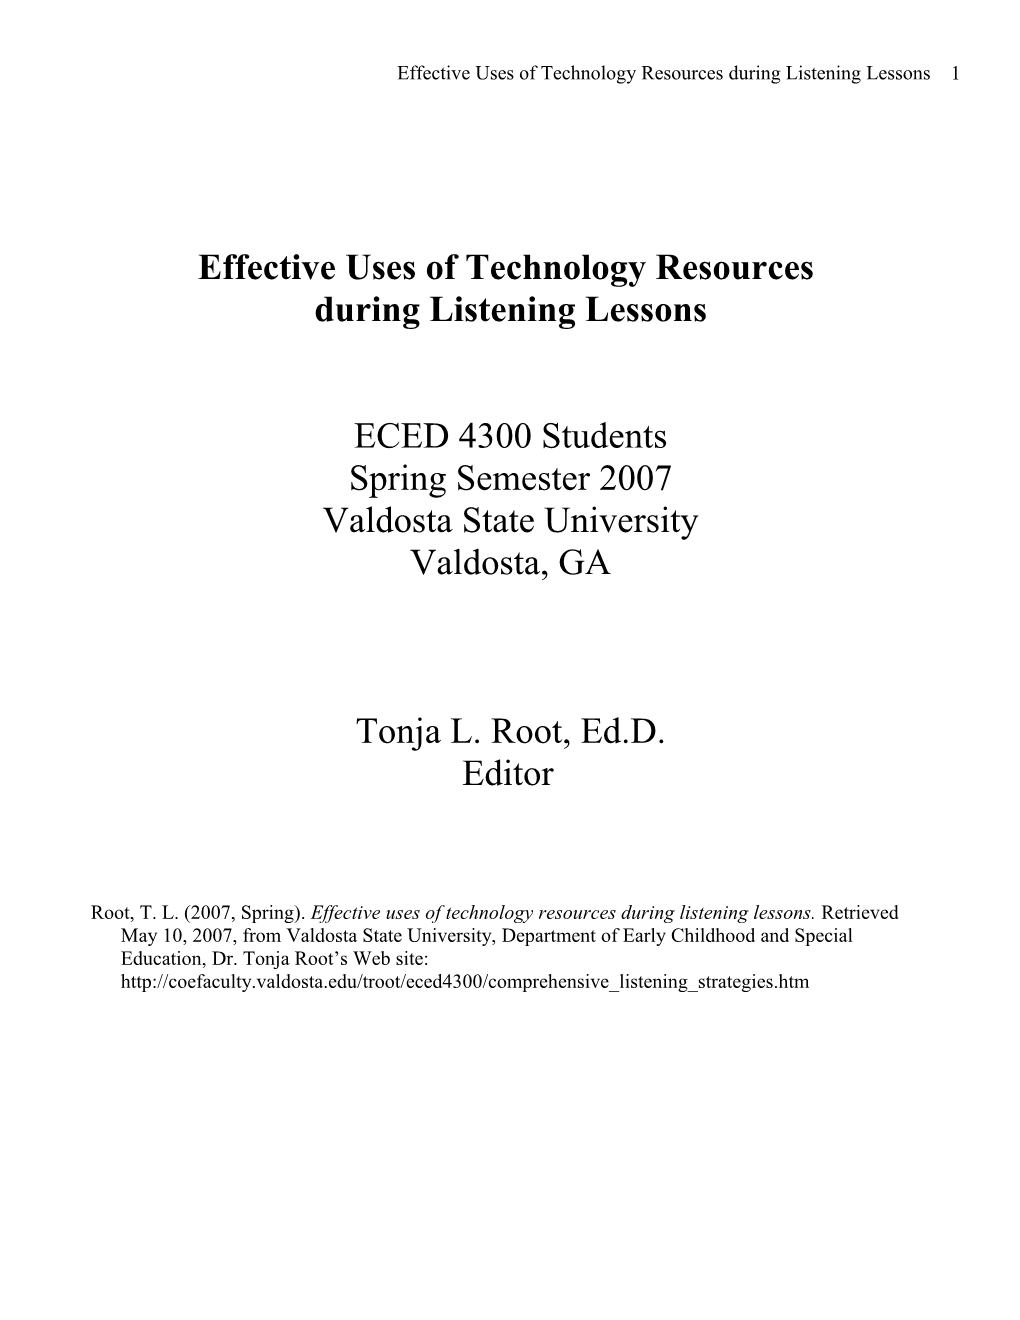 Effective Uses of Technology Resources During Listening Lessons